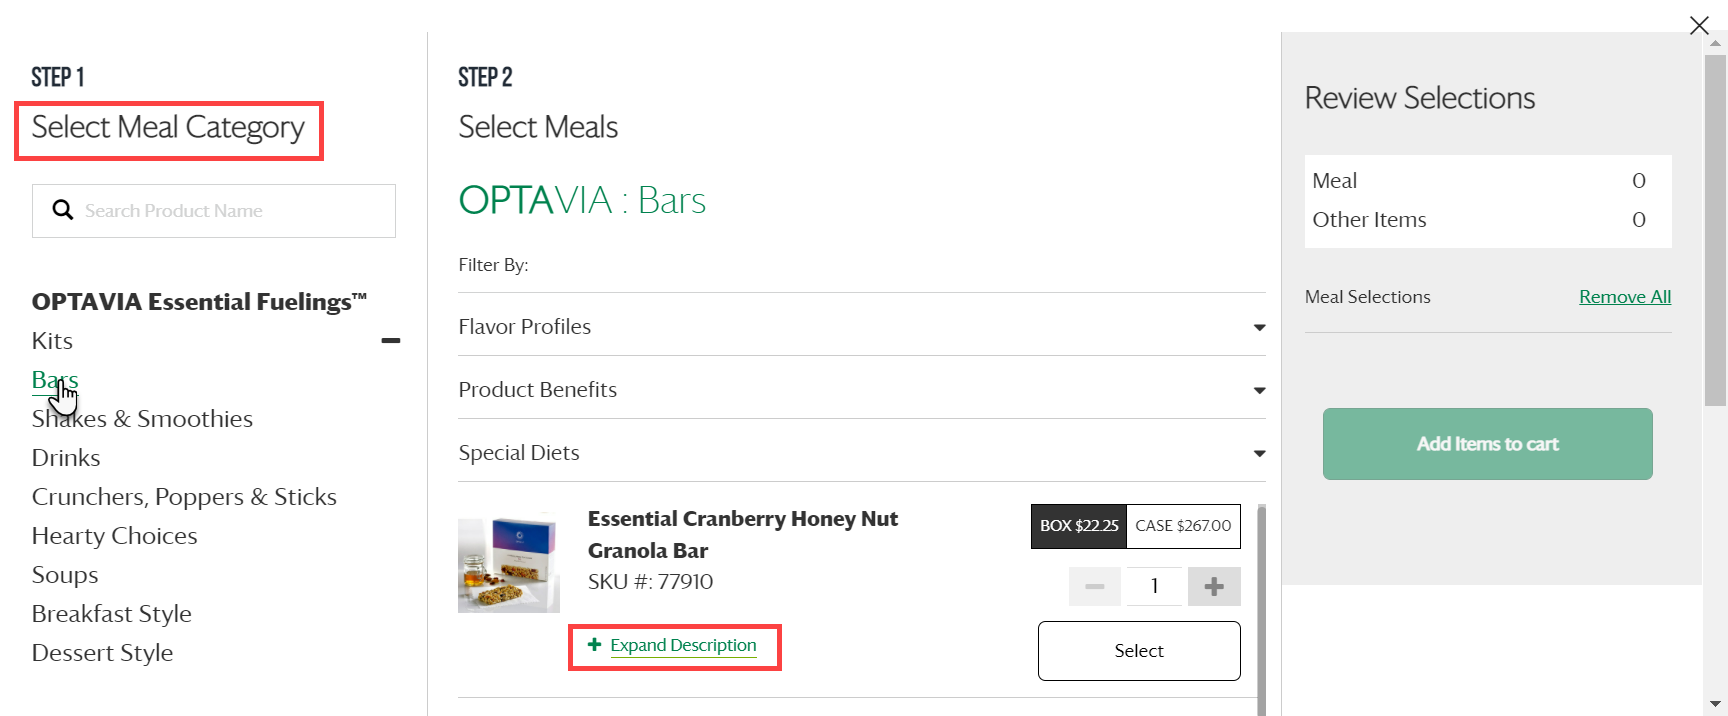 Inset window allowing Clients to search for and select Fuelings. This step highlights how to select a meal category and expand the description below each item.